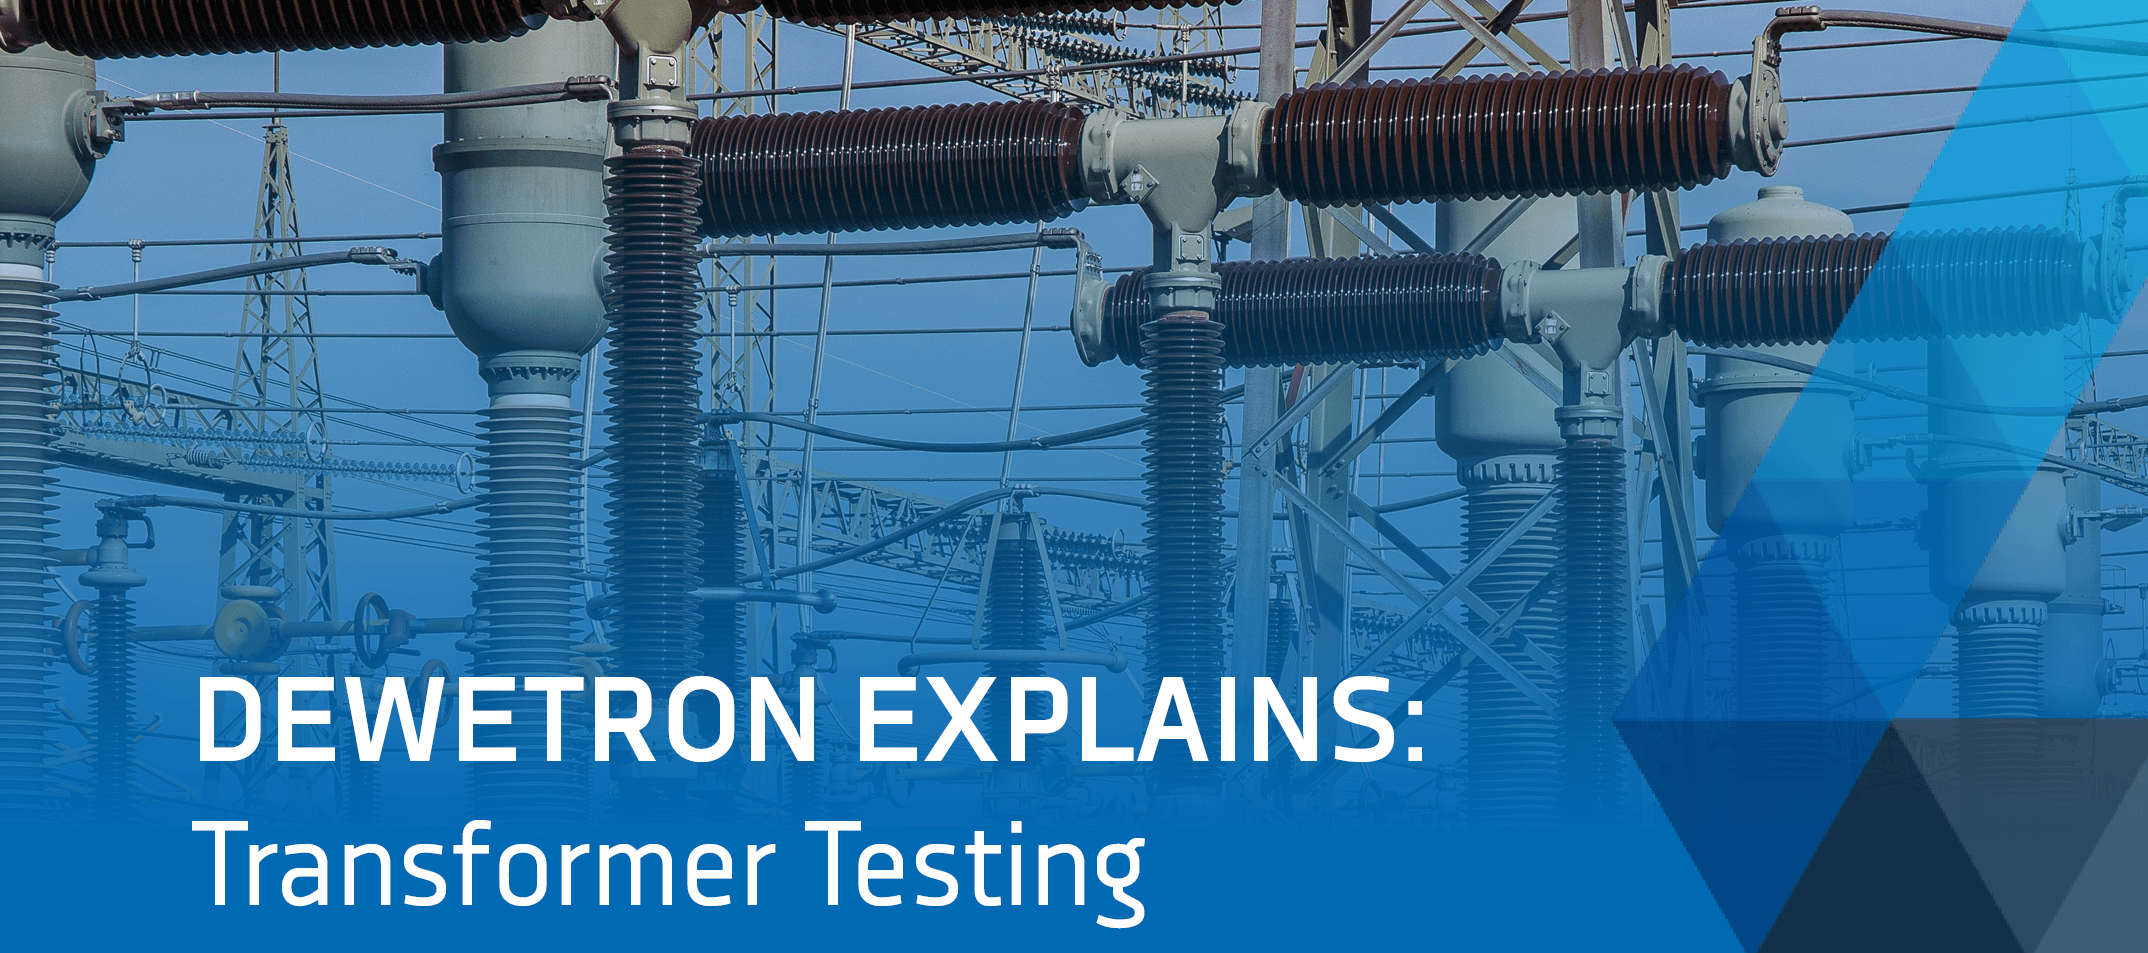 Banner for the whitepaper about transformer testing